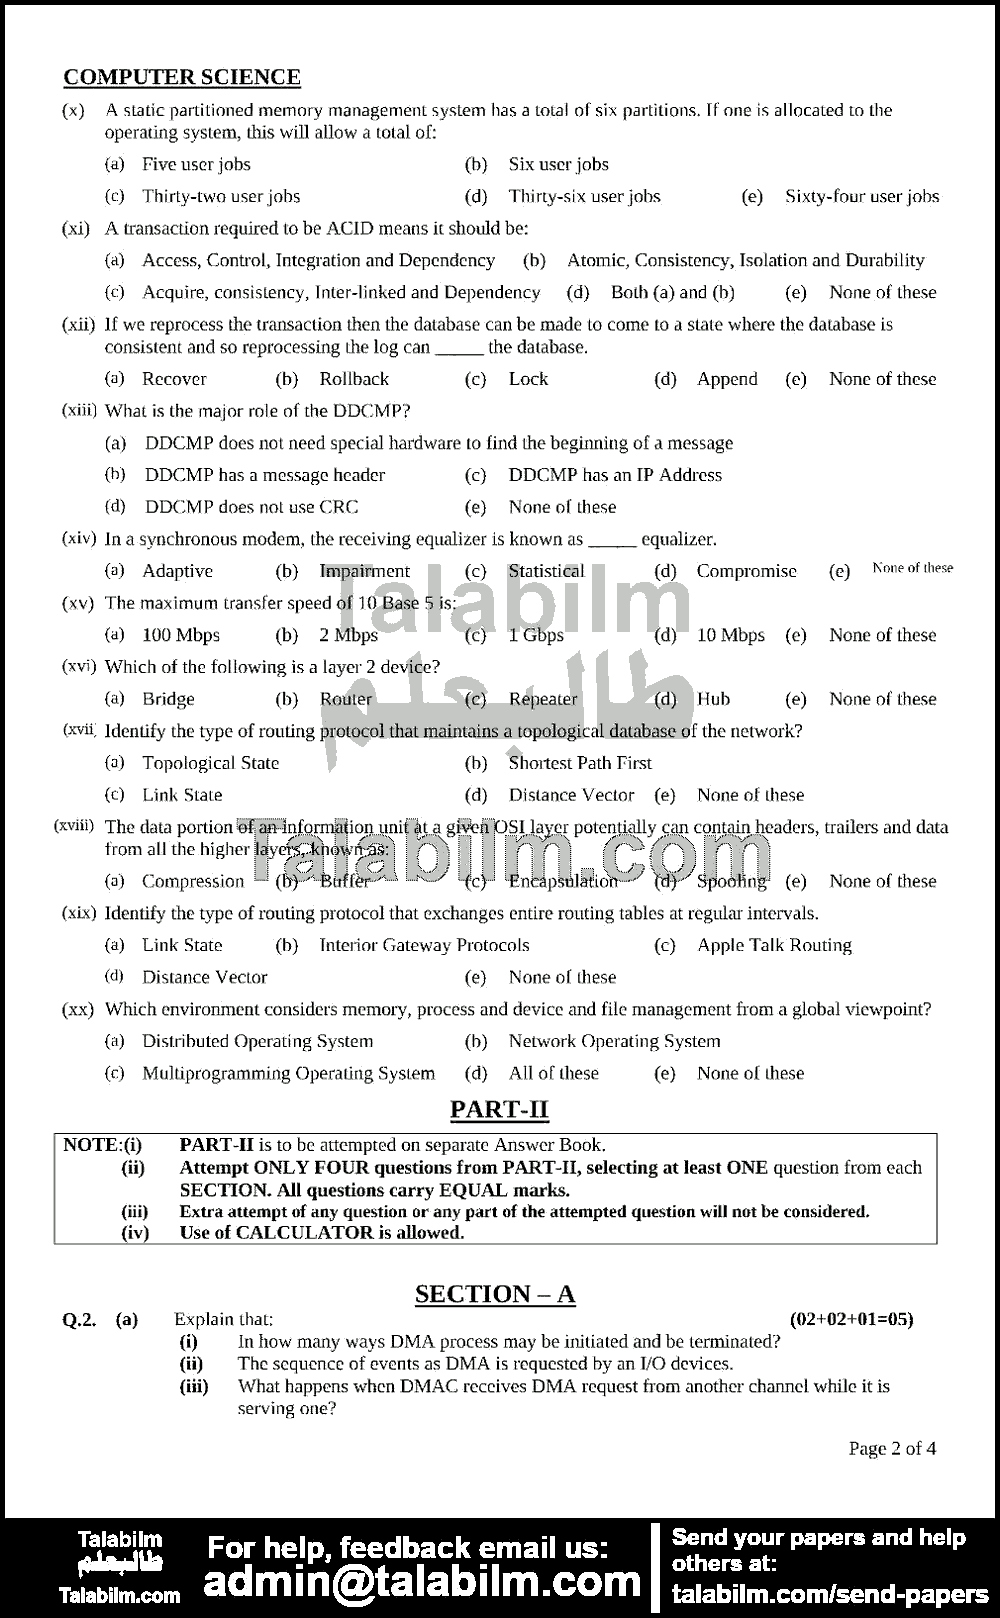 Computer Science 0 past paper for 2011 Page No. 2